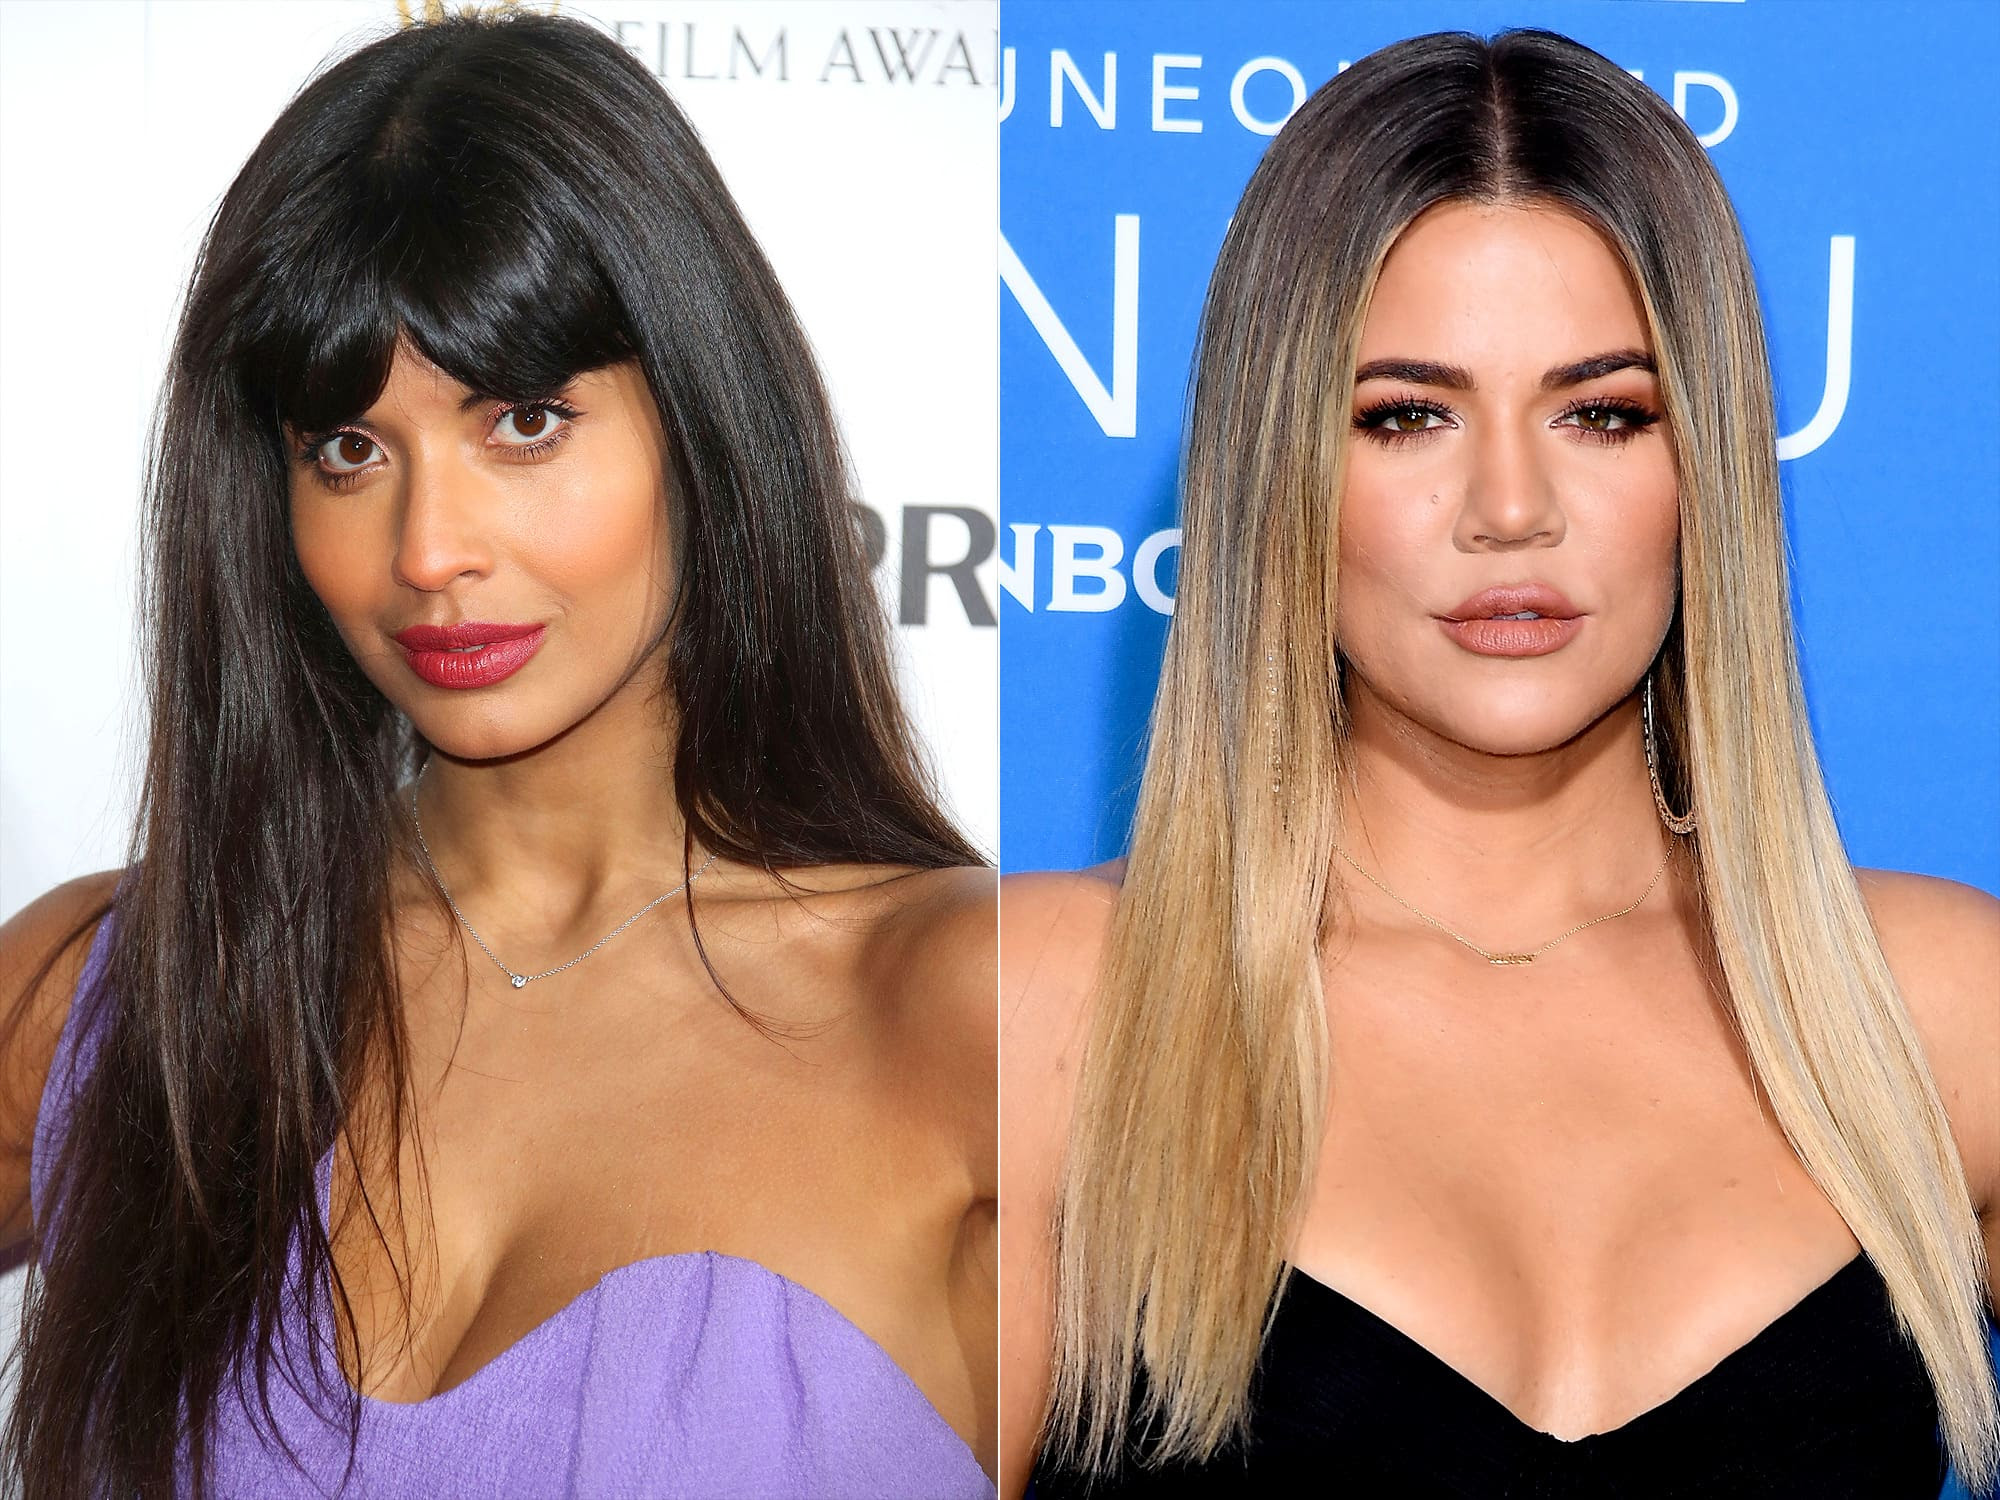 jameela-jamil-tells-khloe-kardashian-to-check-your-moral-compass-after-defending-her-weightloss-tea-advertising